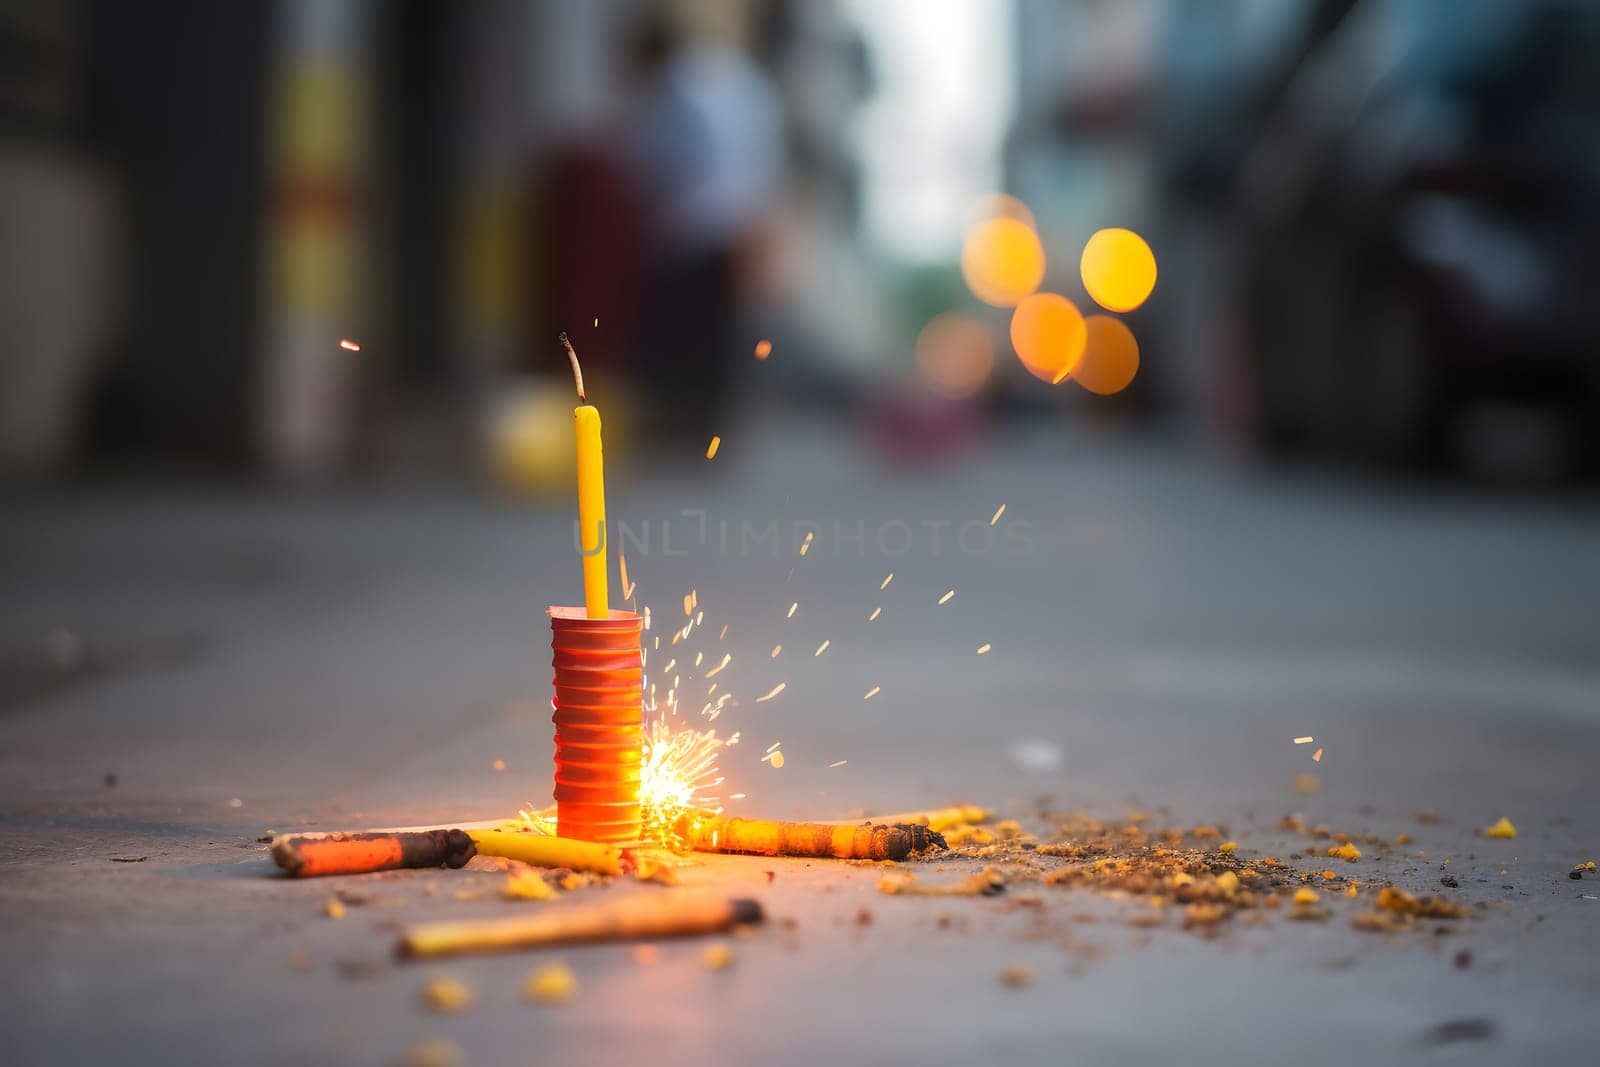 Happy Diwali - Lit diya lamp on street with firecrackers, neural network generated photorealistic image by z1b